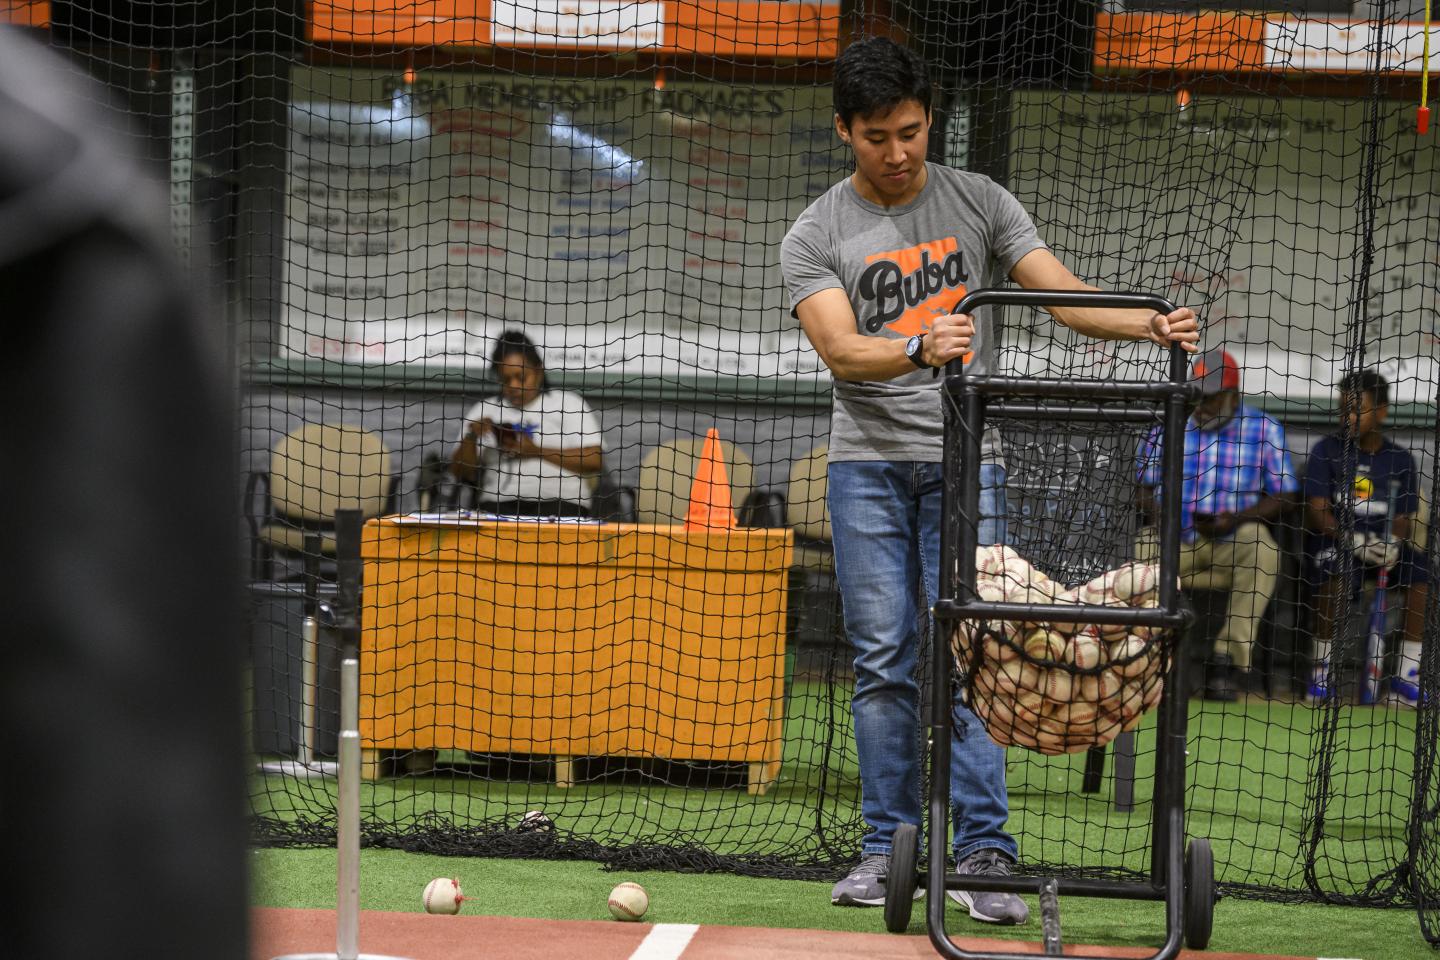 Johns Hopkins student Neal Lim organizes sports equipment on an indoor court